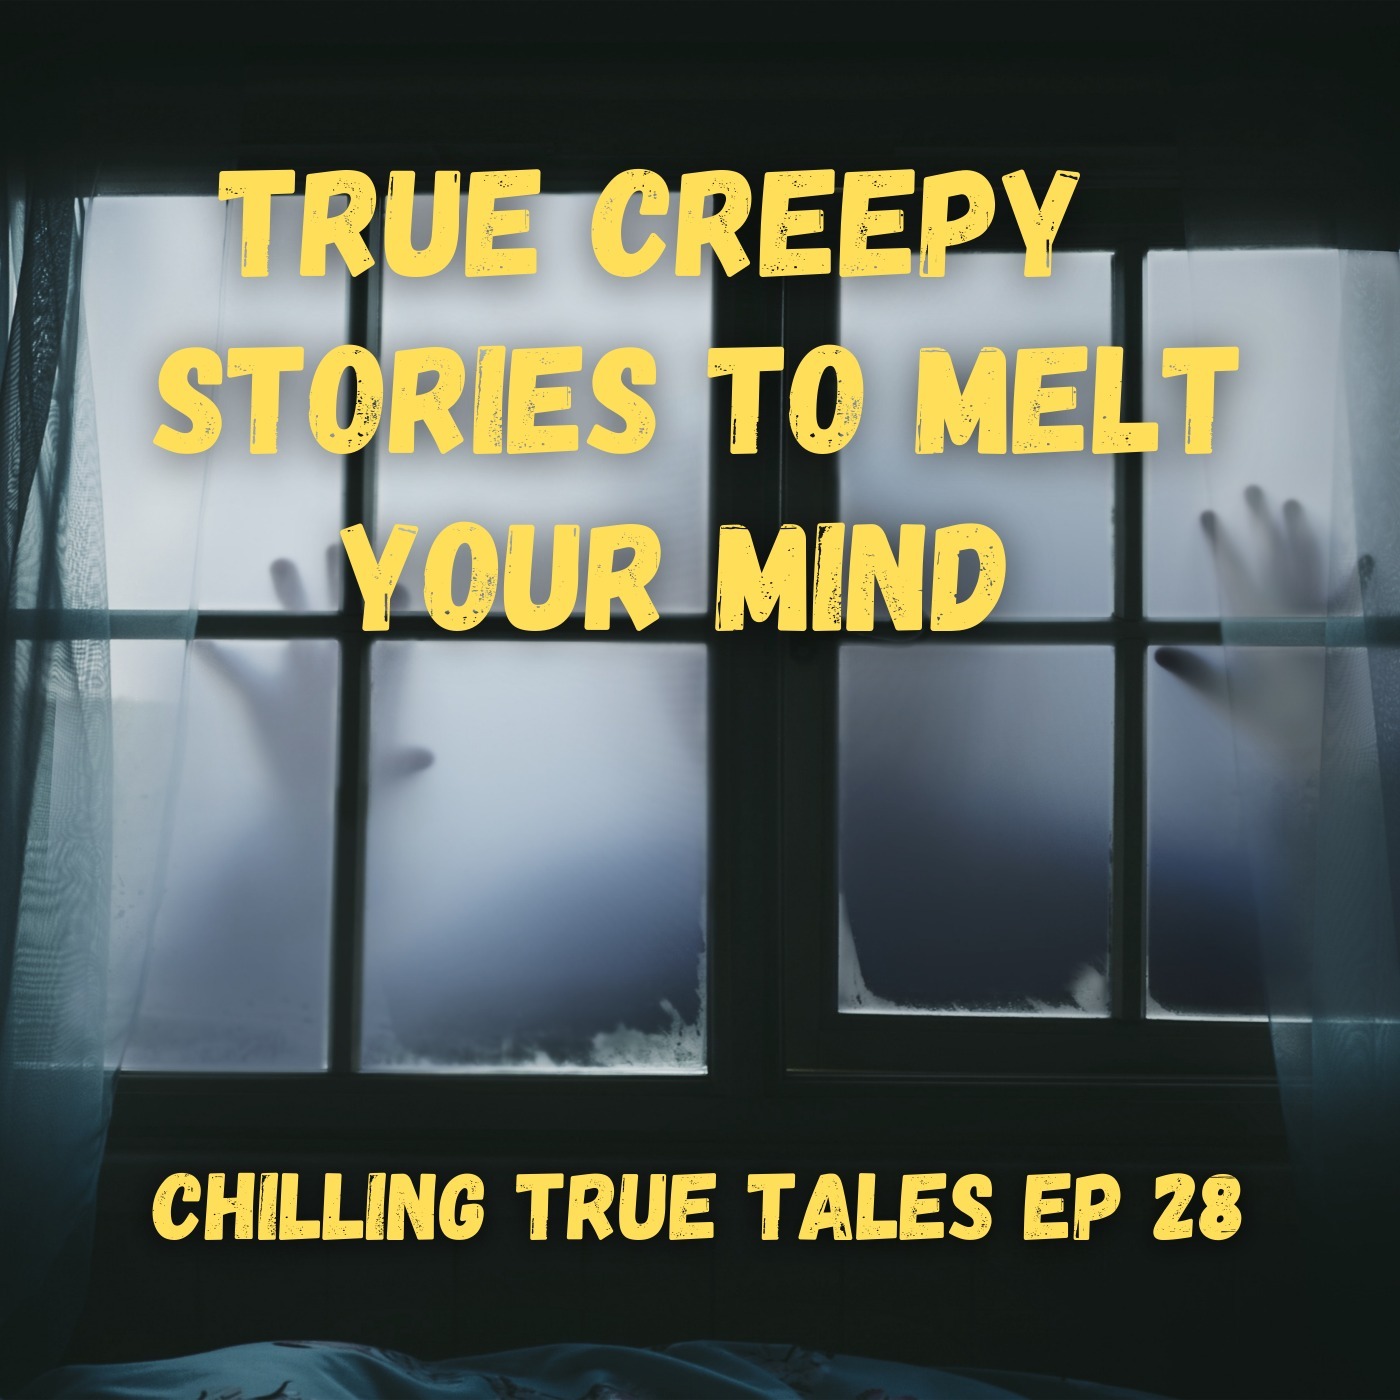 Chilling True Tales - Ep 28 - True Creepy Stories to Melt Your Mind